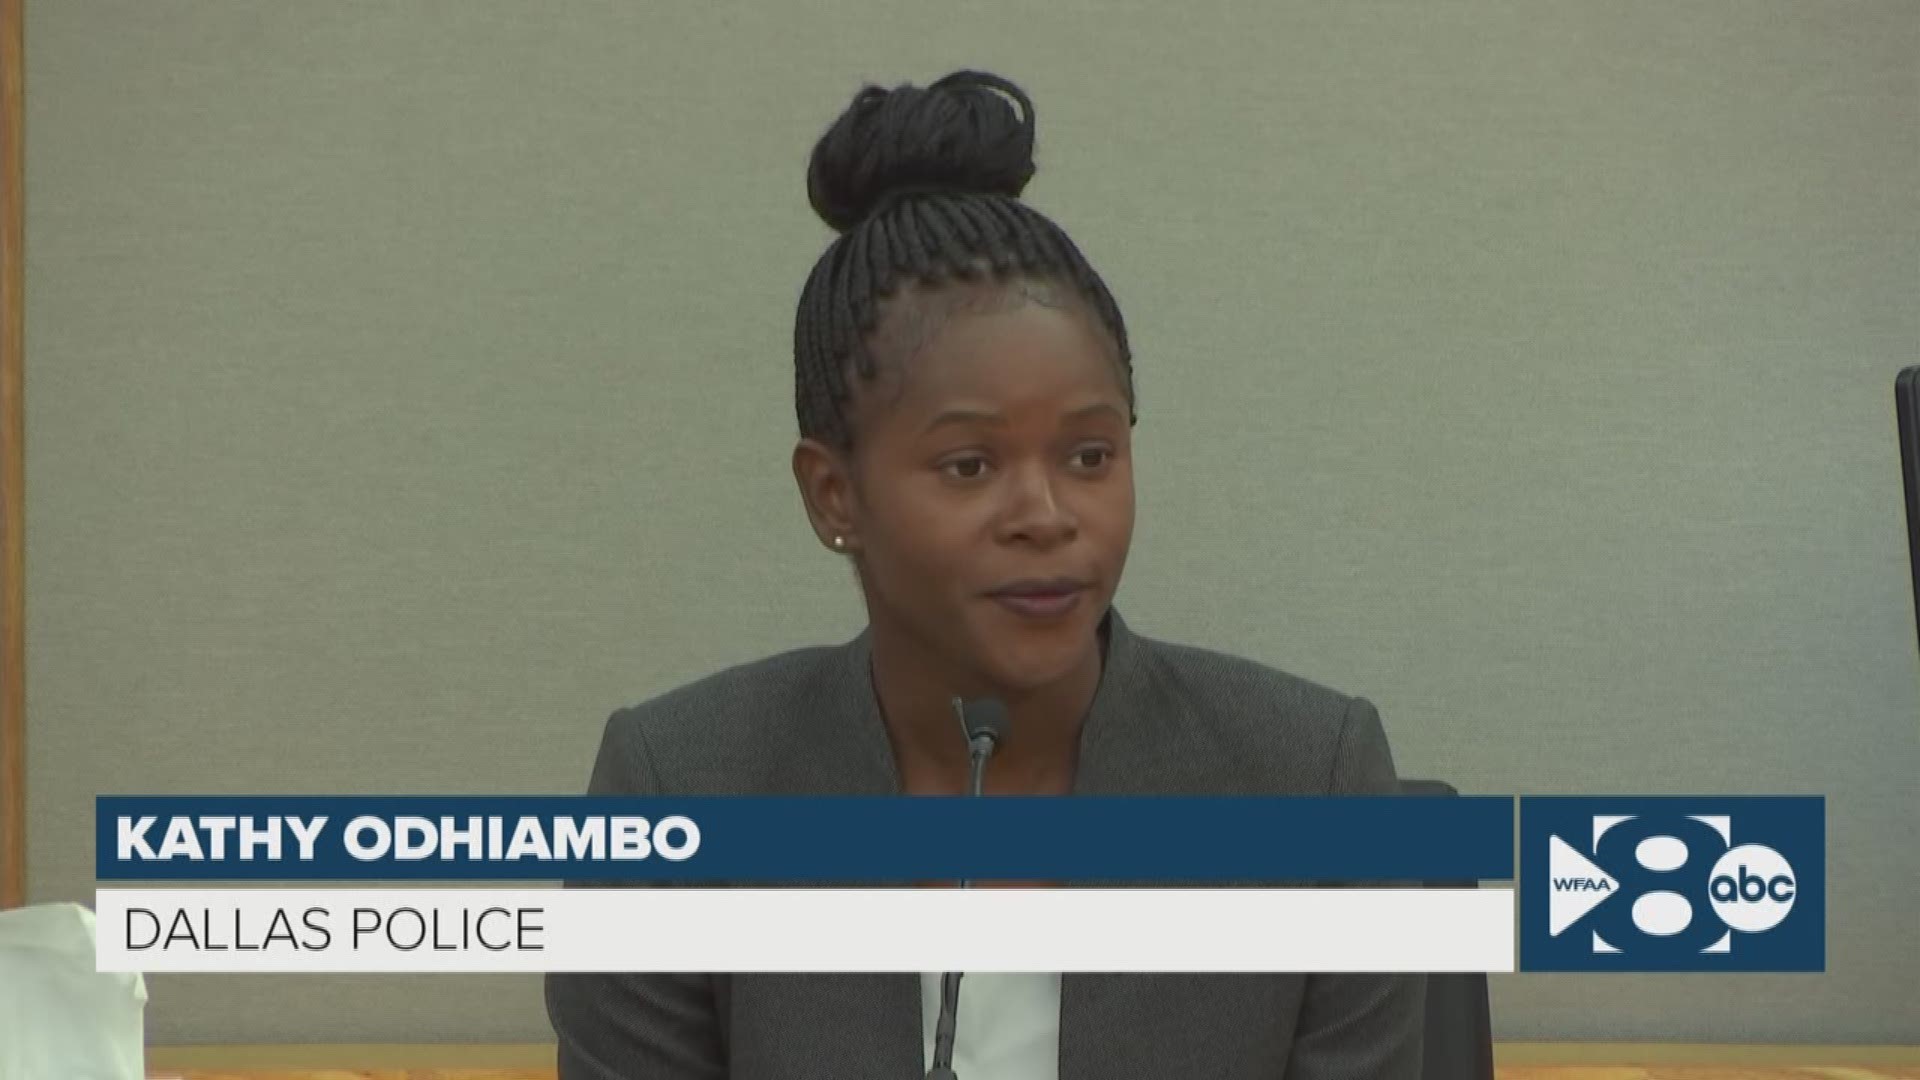 Cathy Odhiambo, one of Amber Guyger's friends, testified Wednesday during the punishment phase of the trial.